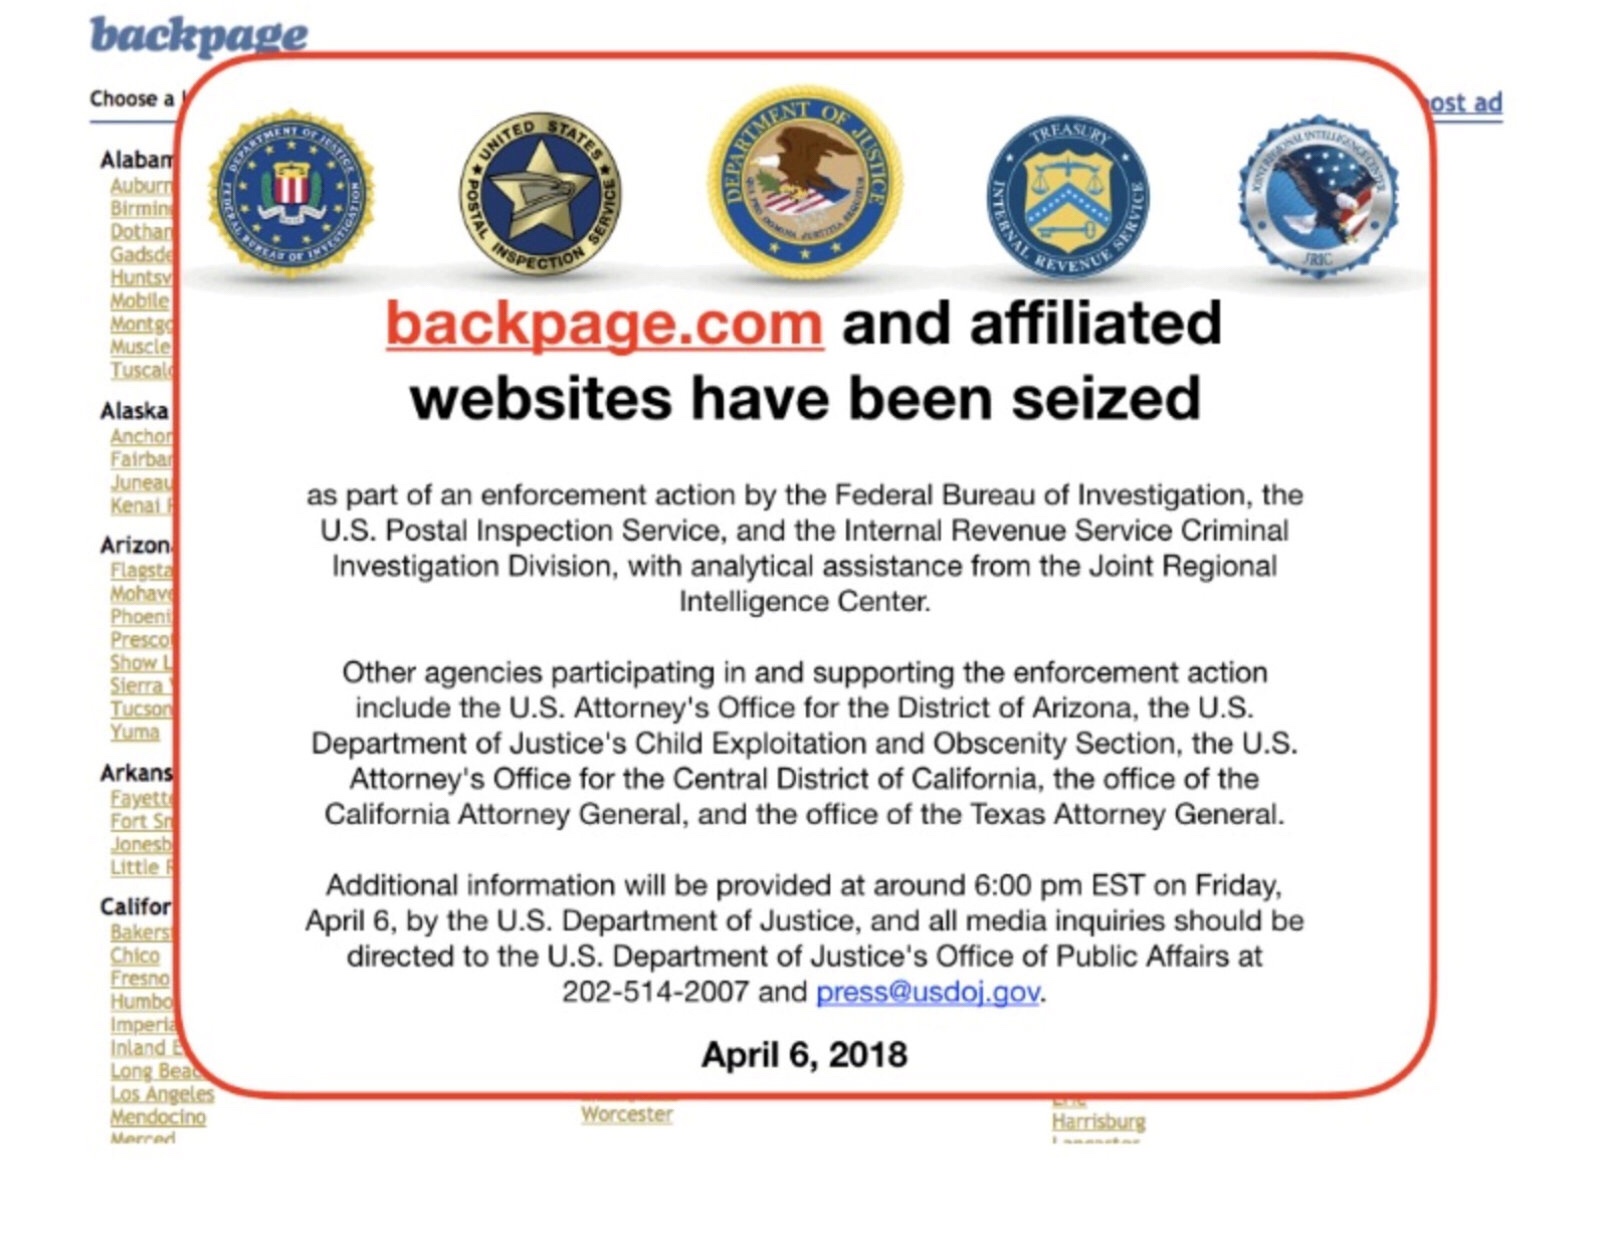 Backpage.com officials have been indicted after FBI shutdown